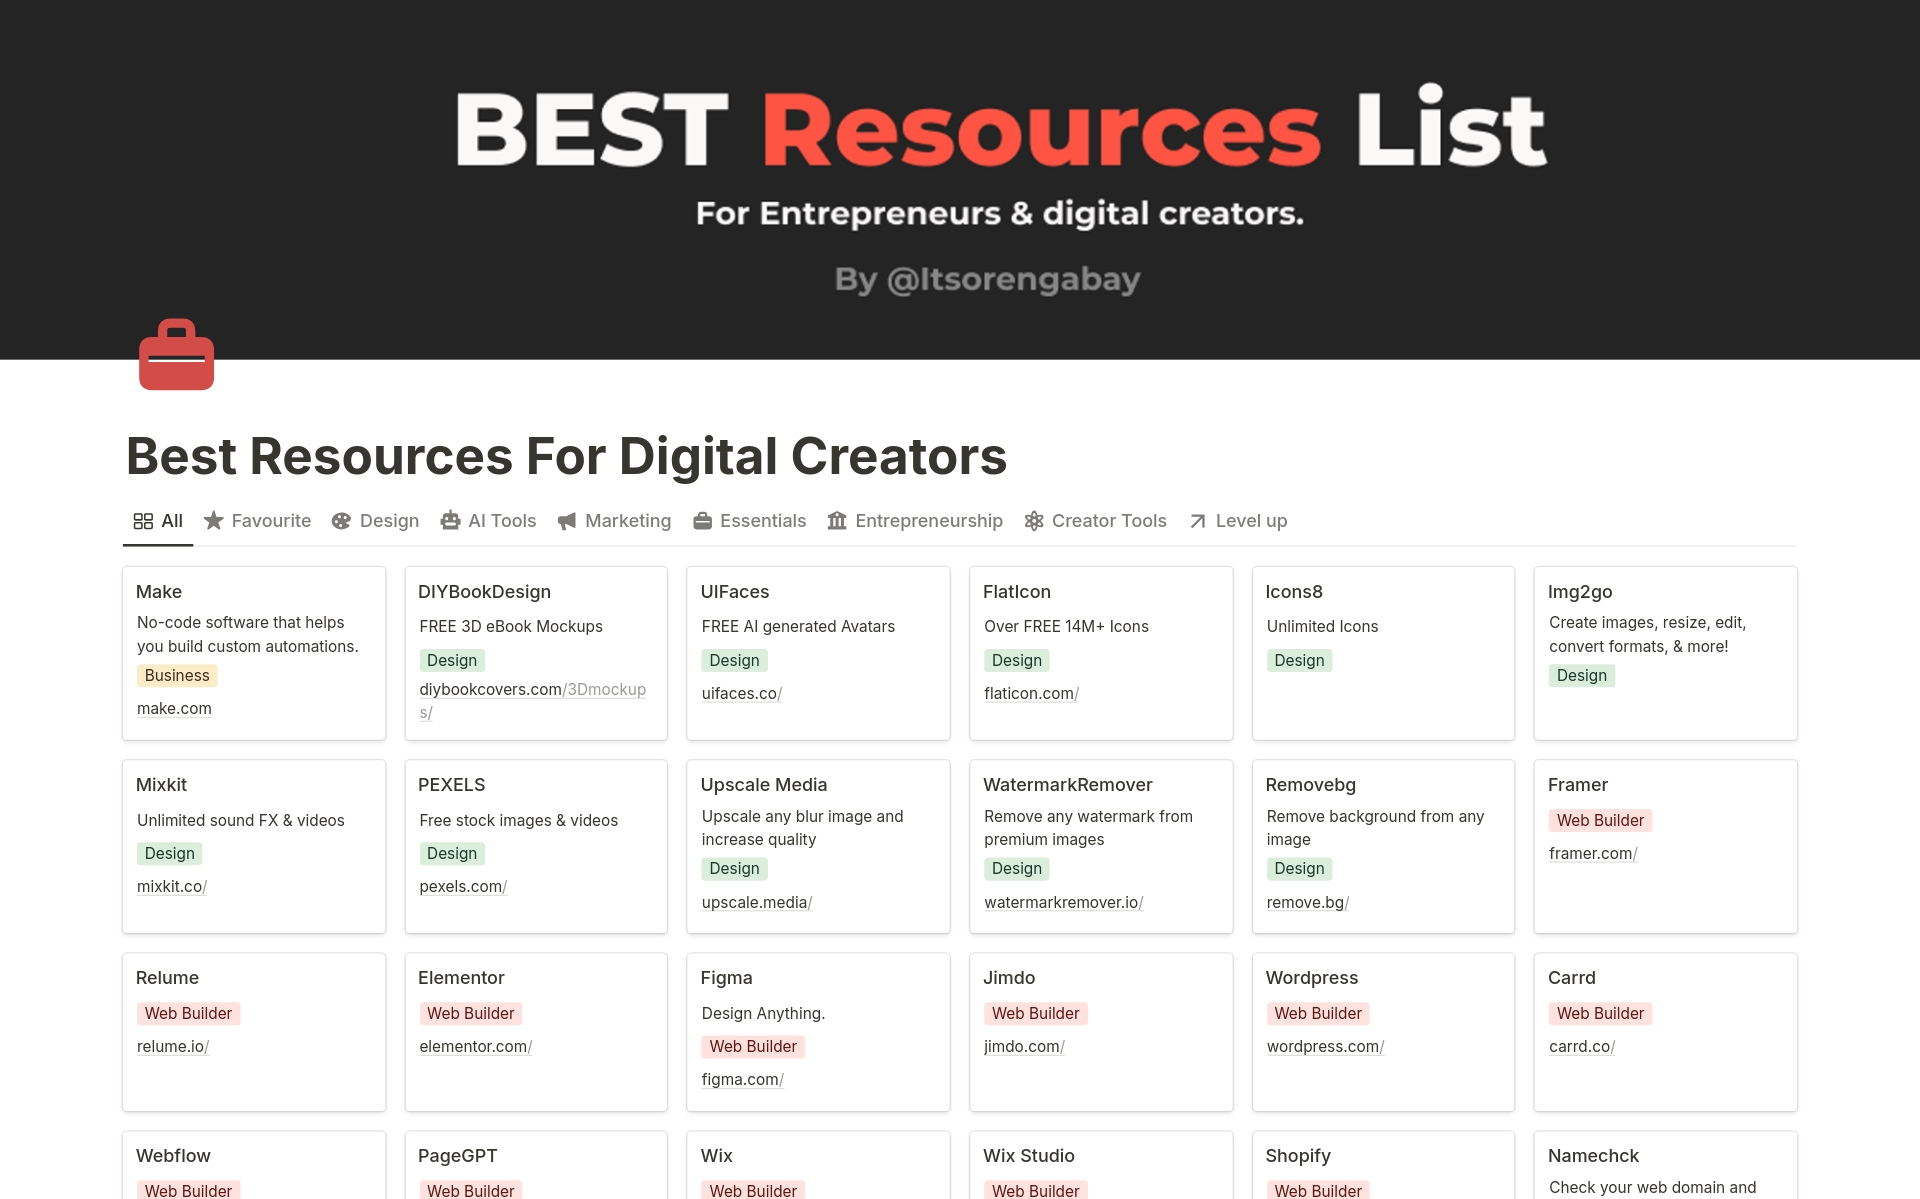 Get Access to over 150+ Useful Websites & AI tools for Creators & Business Owners

Are you ready to take your creative and entrepreneurial game to the next level?

I'm here to help with collecting the latest and greatest free resources for professionals like you.